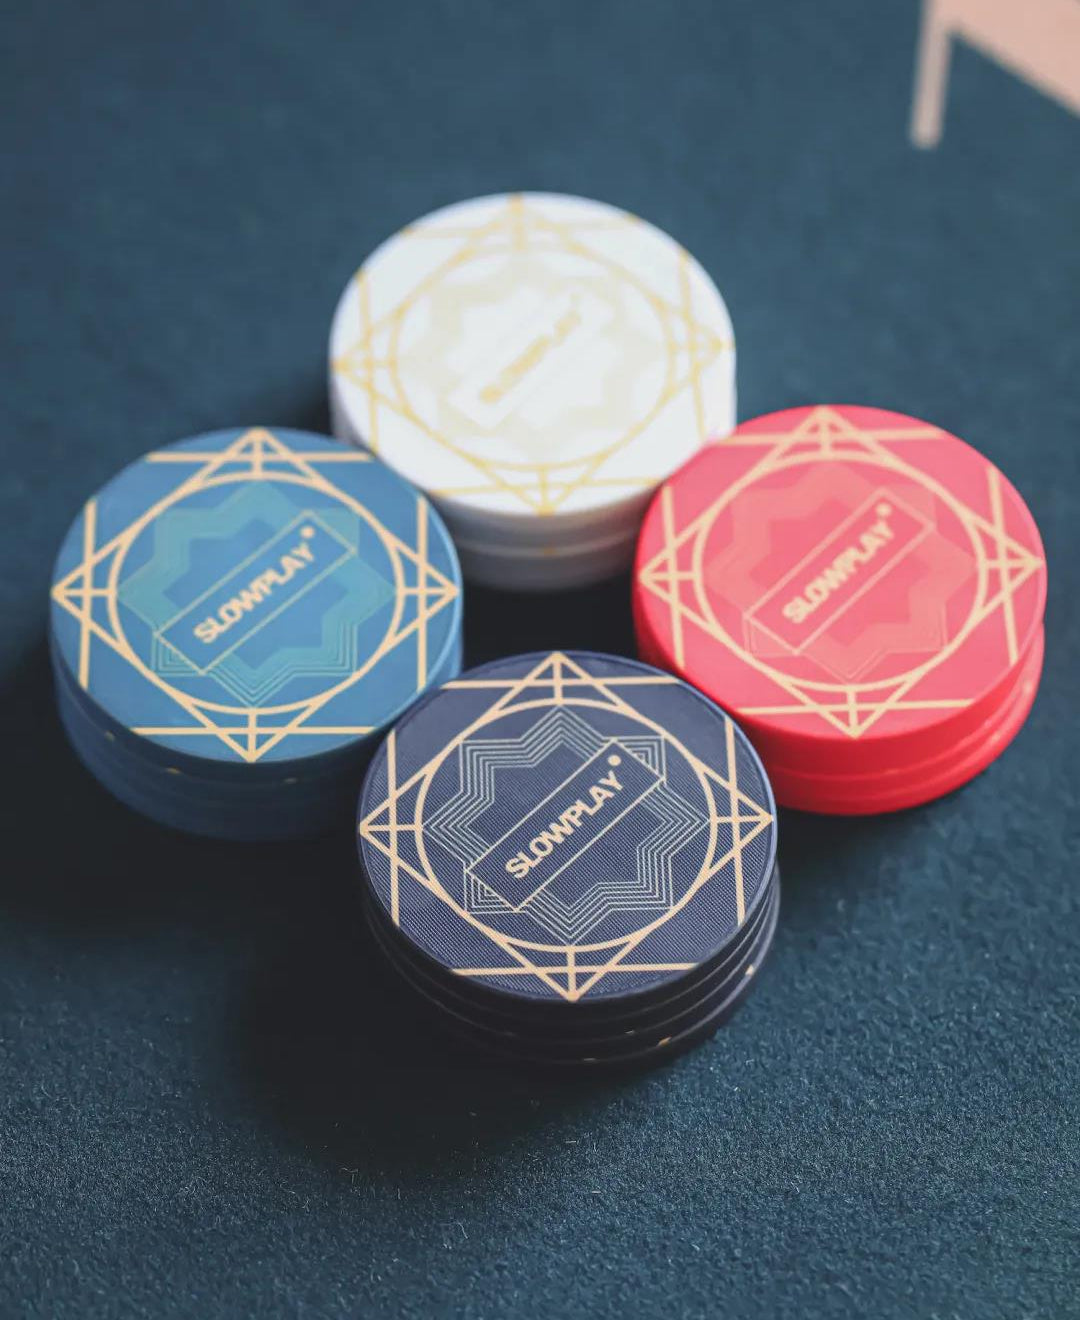 Beautiful Graphic Design Inspired by Art Deco as Seen on SLOWPLAY's ACES Poker Chips